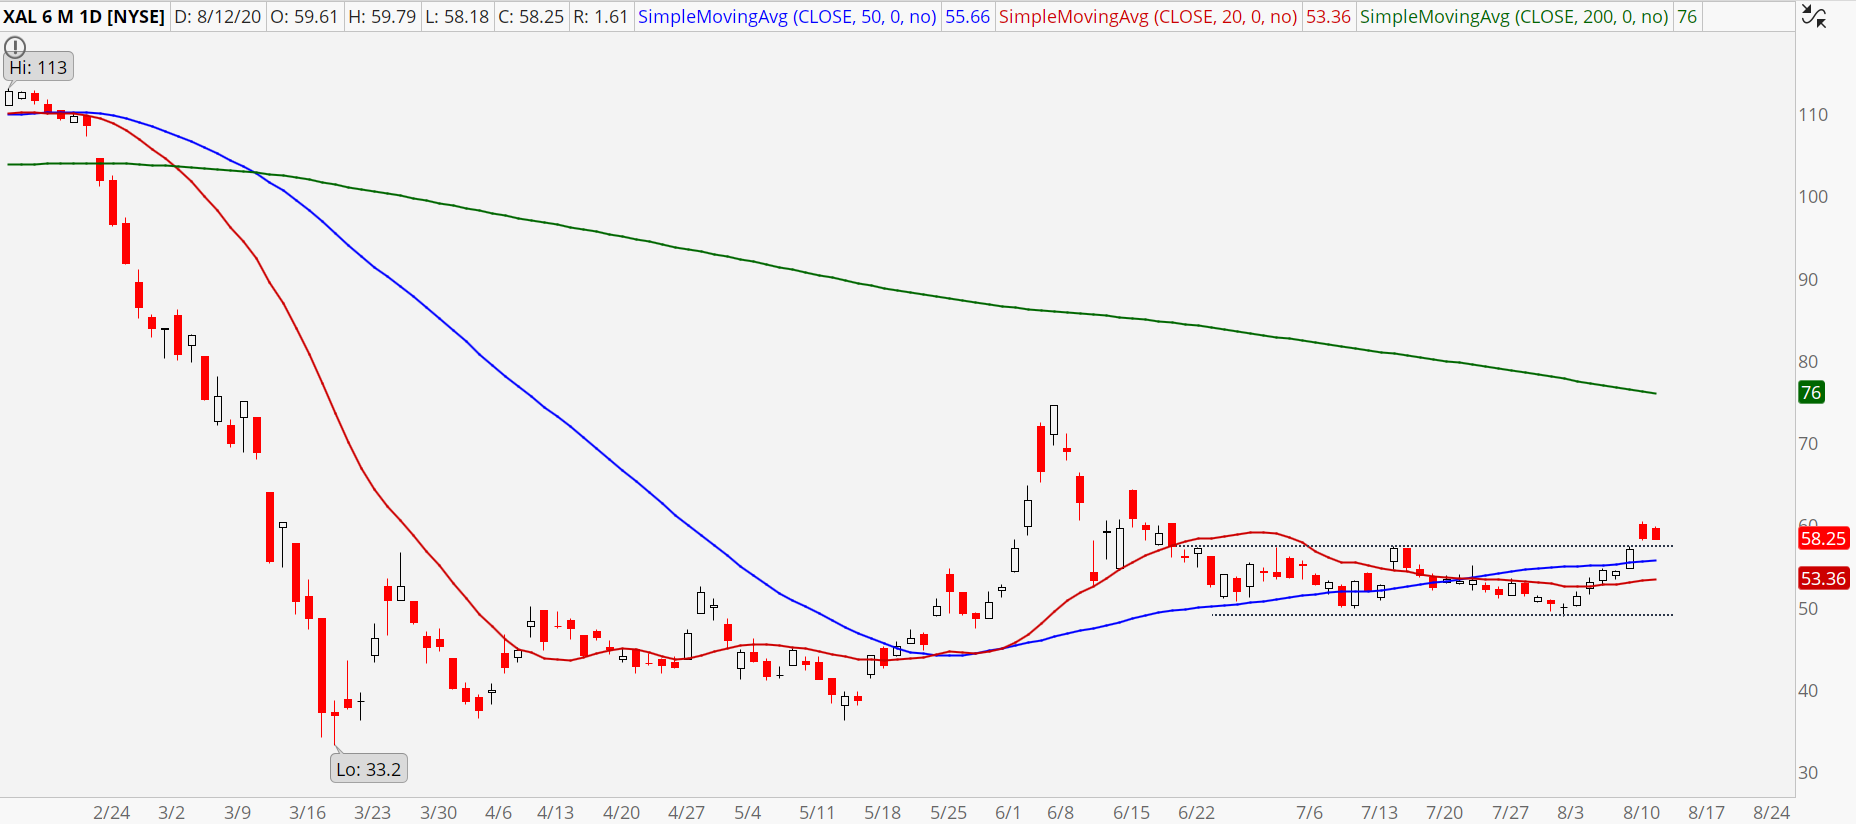 AMEX Airline Index (XAL) showing range breakout